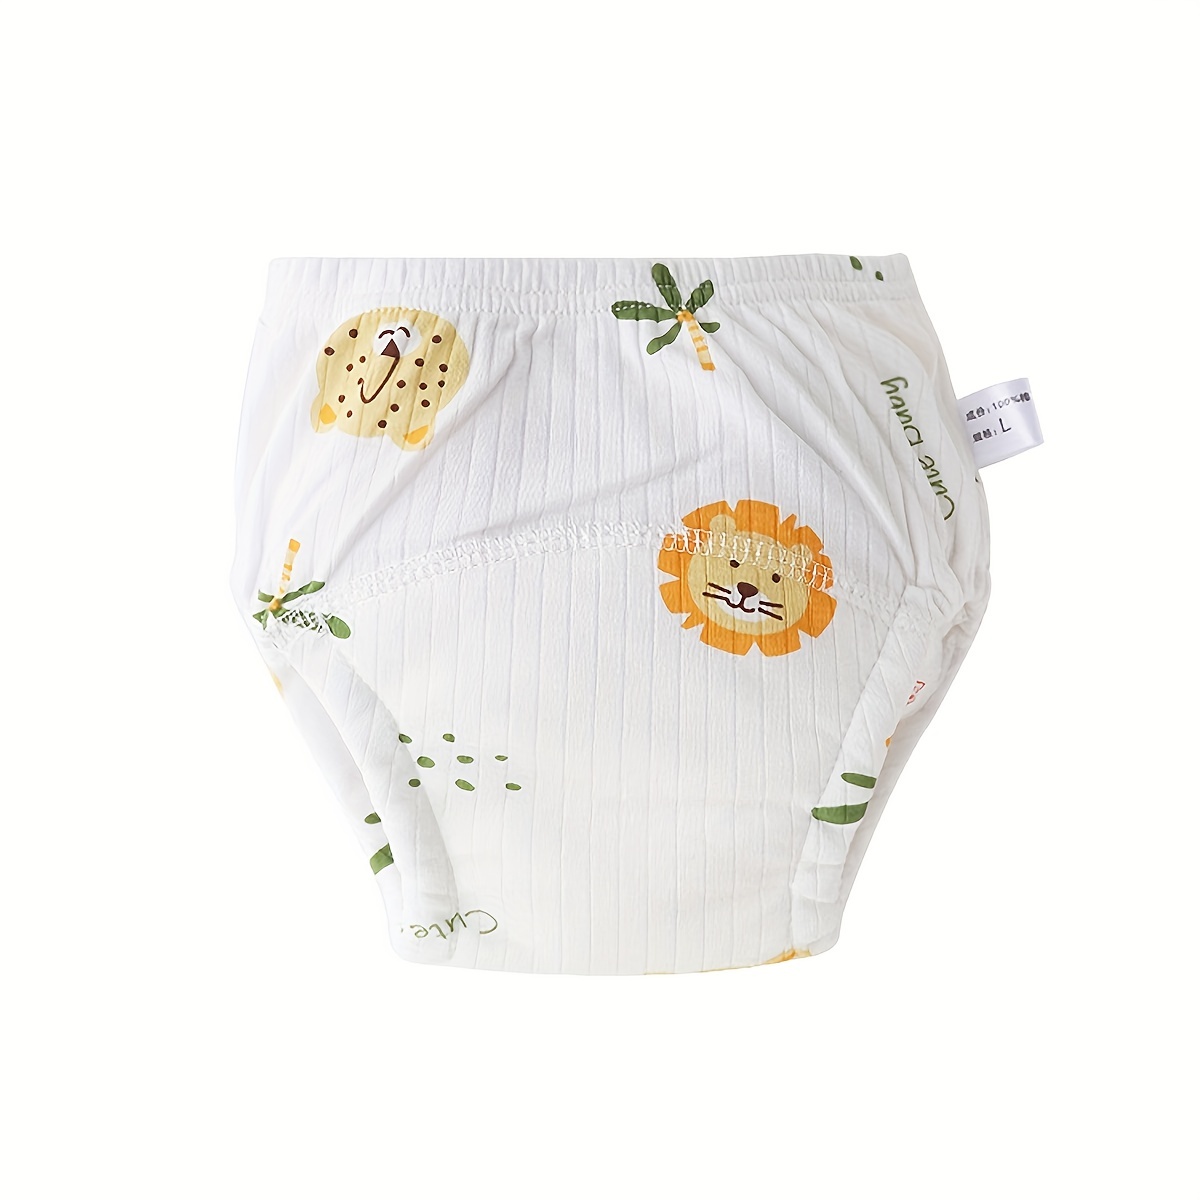 Baby Potty Training Pants, Soft Cotton Washable Nappy Reusable